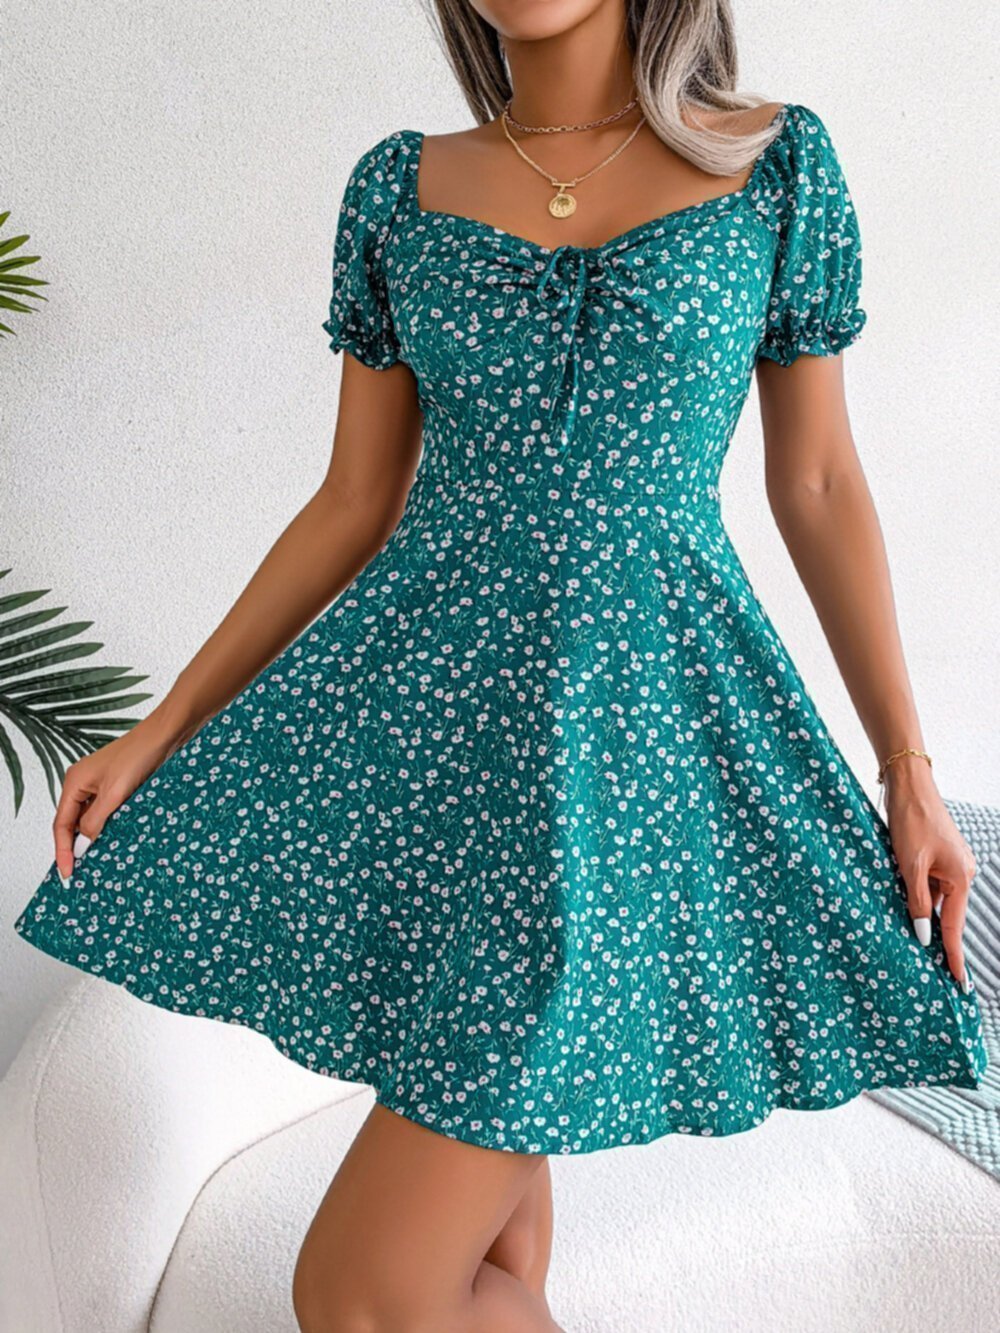 New floral square neck fitted high waist dress